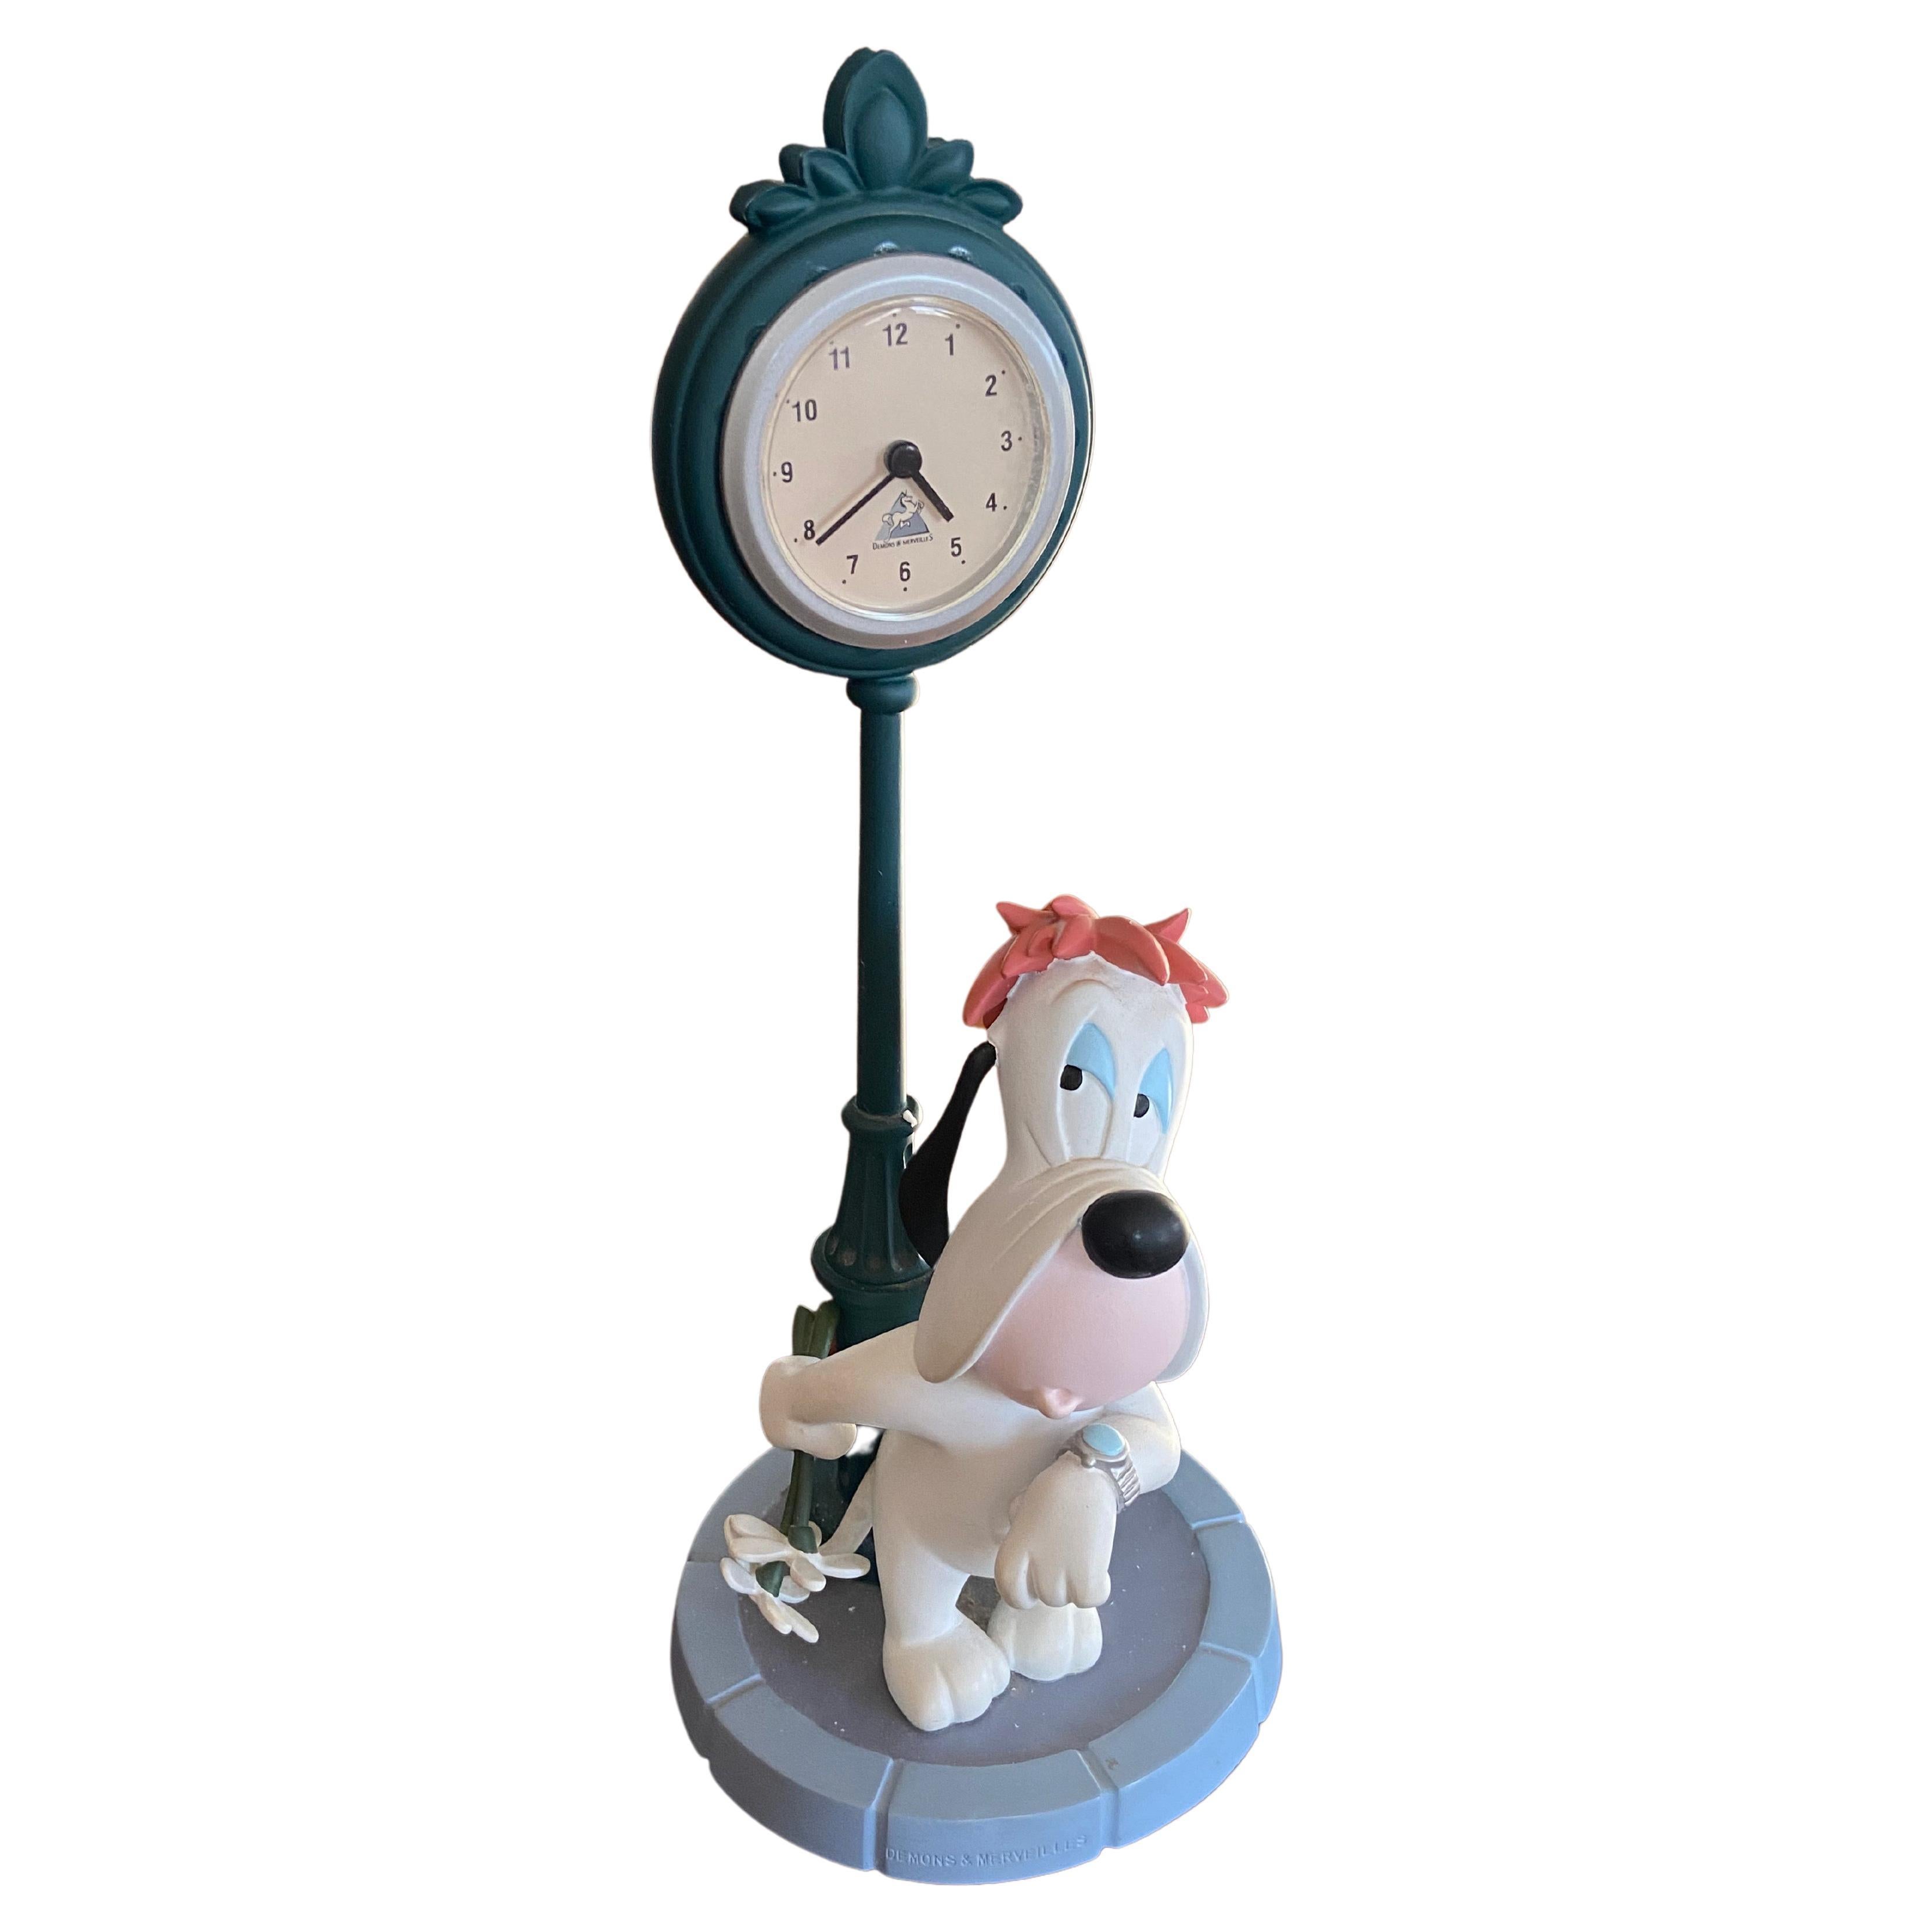 Rare and Collectable Droopy by the Clock by Demons & Merveilles Figurine Statue For Sale